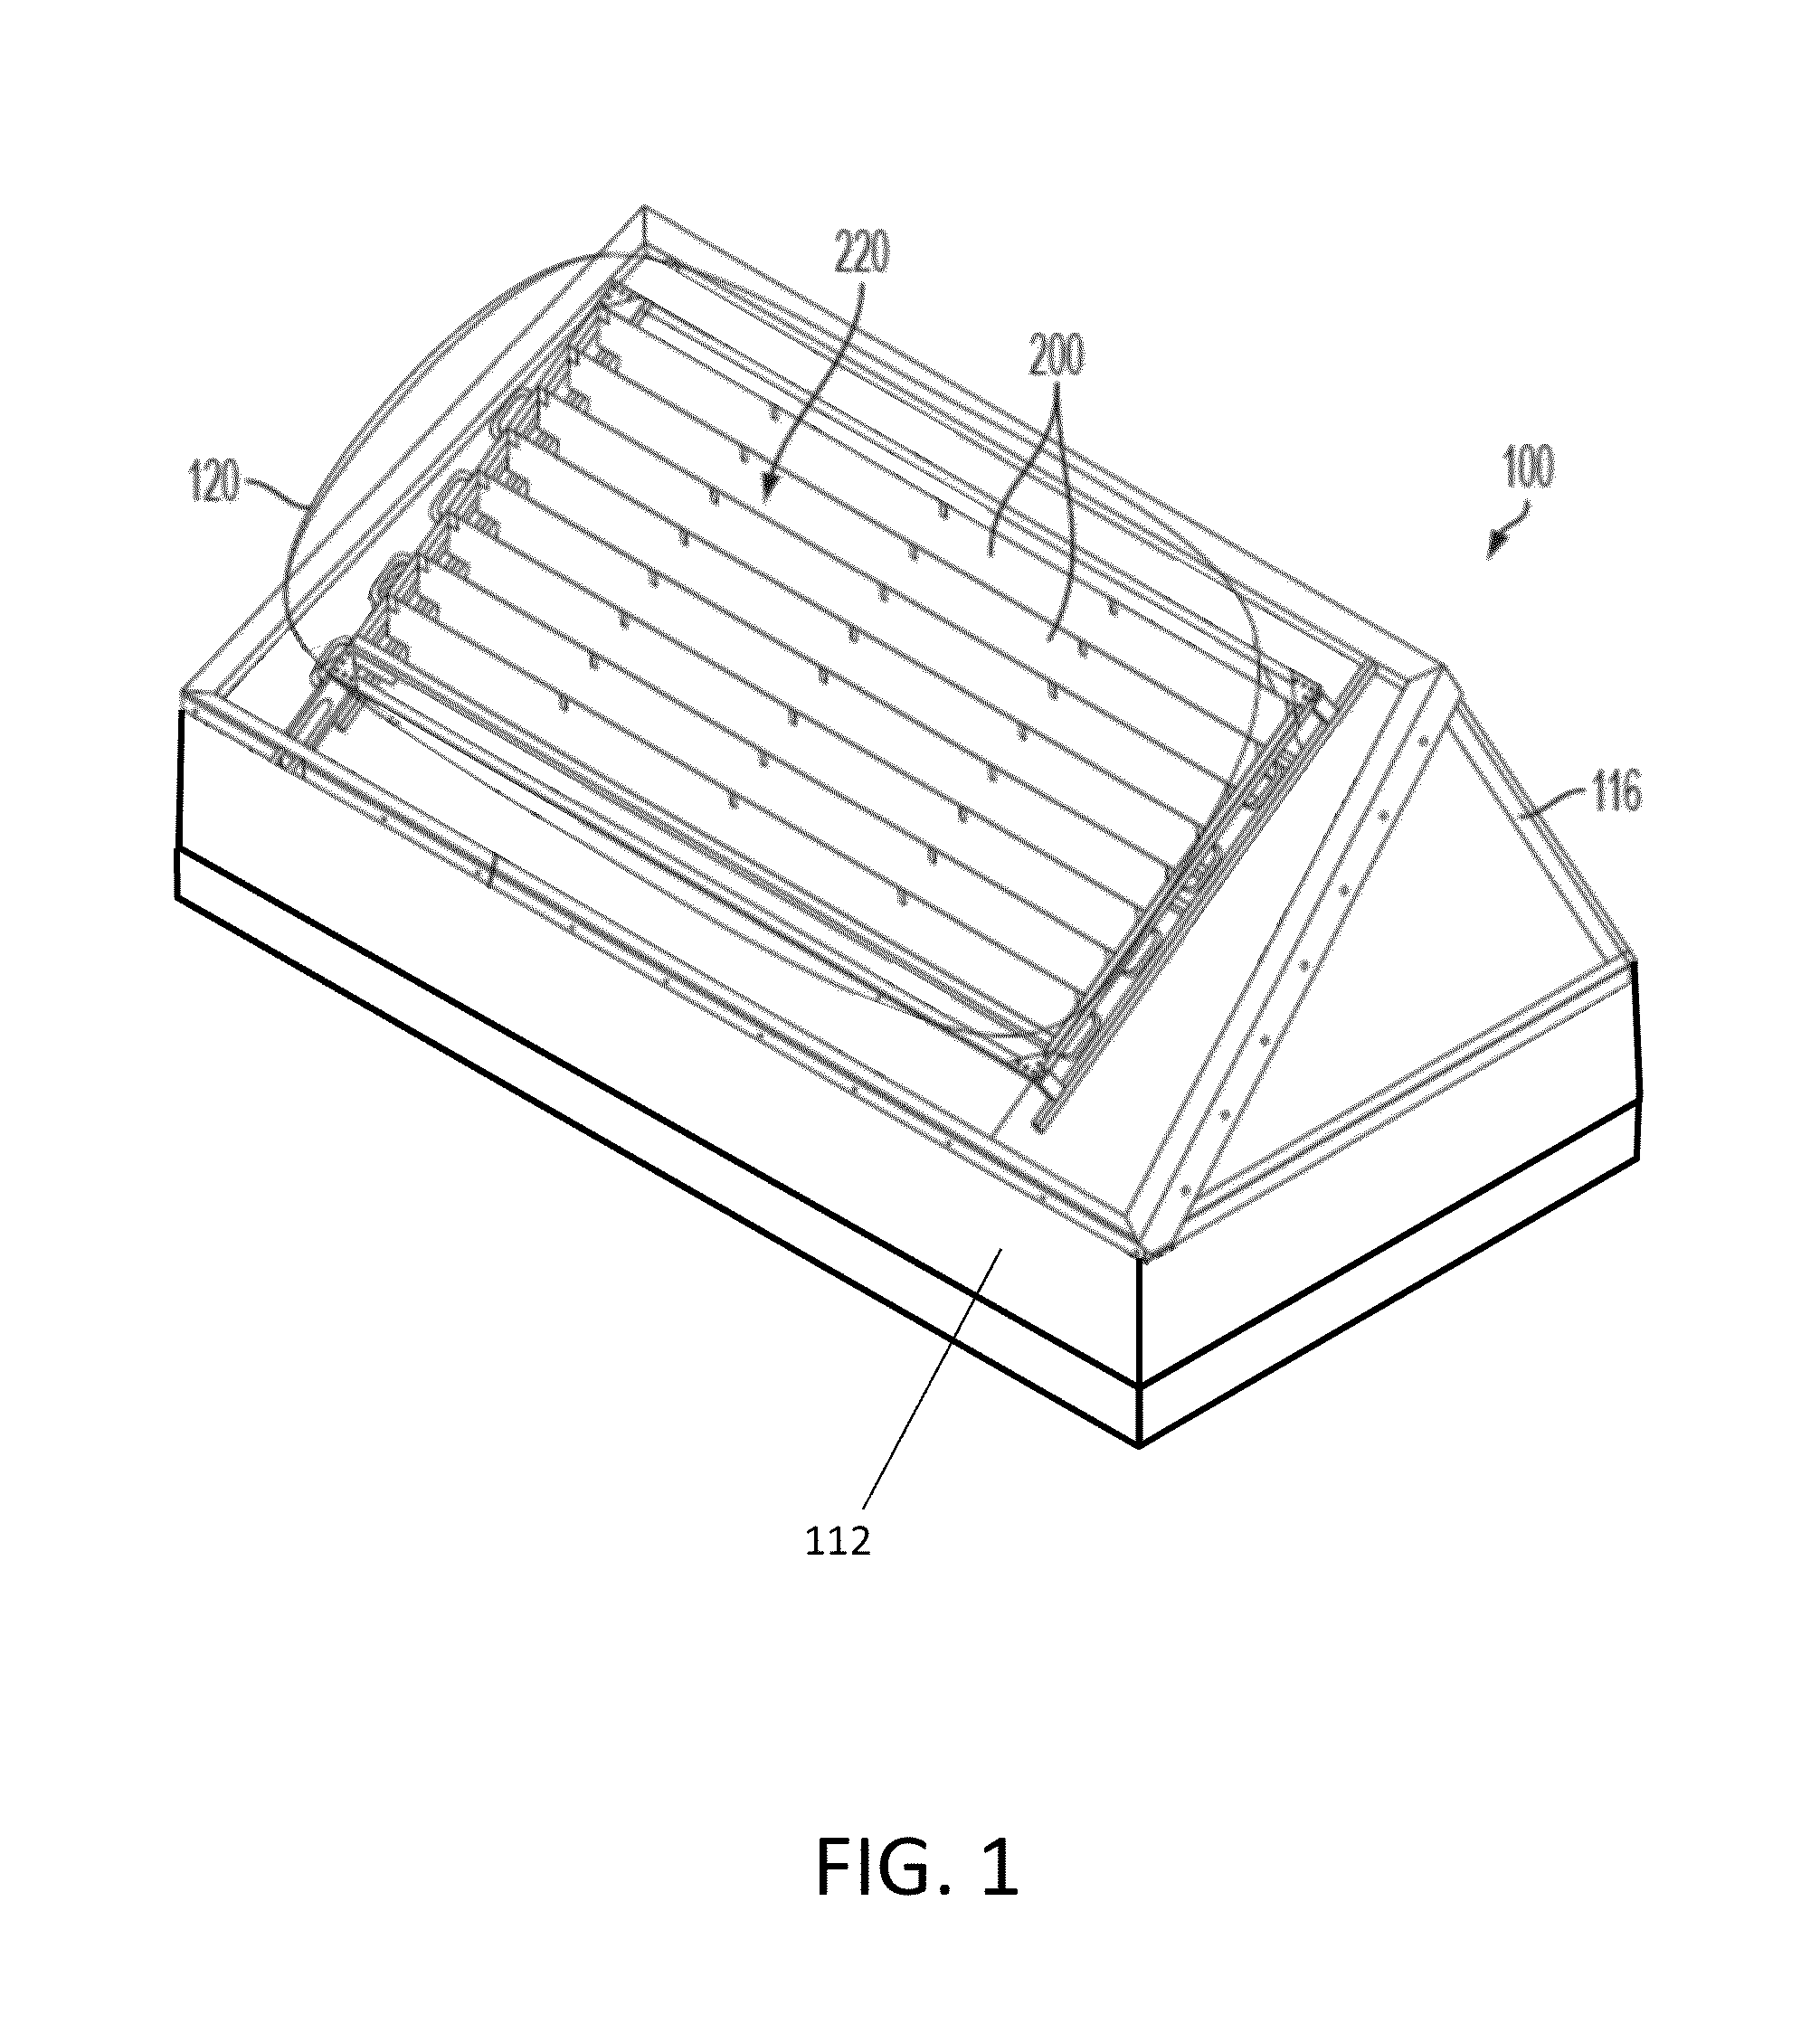 Housing and mounting assembly for skylight energy management system